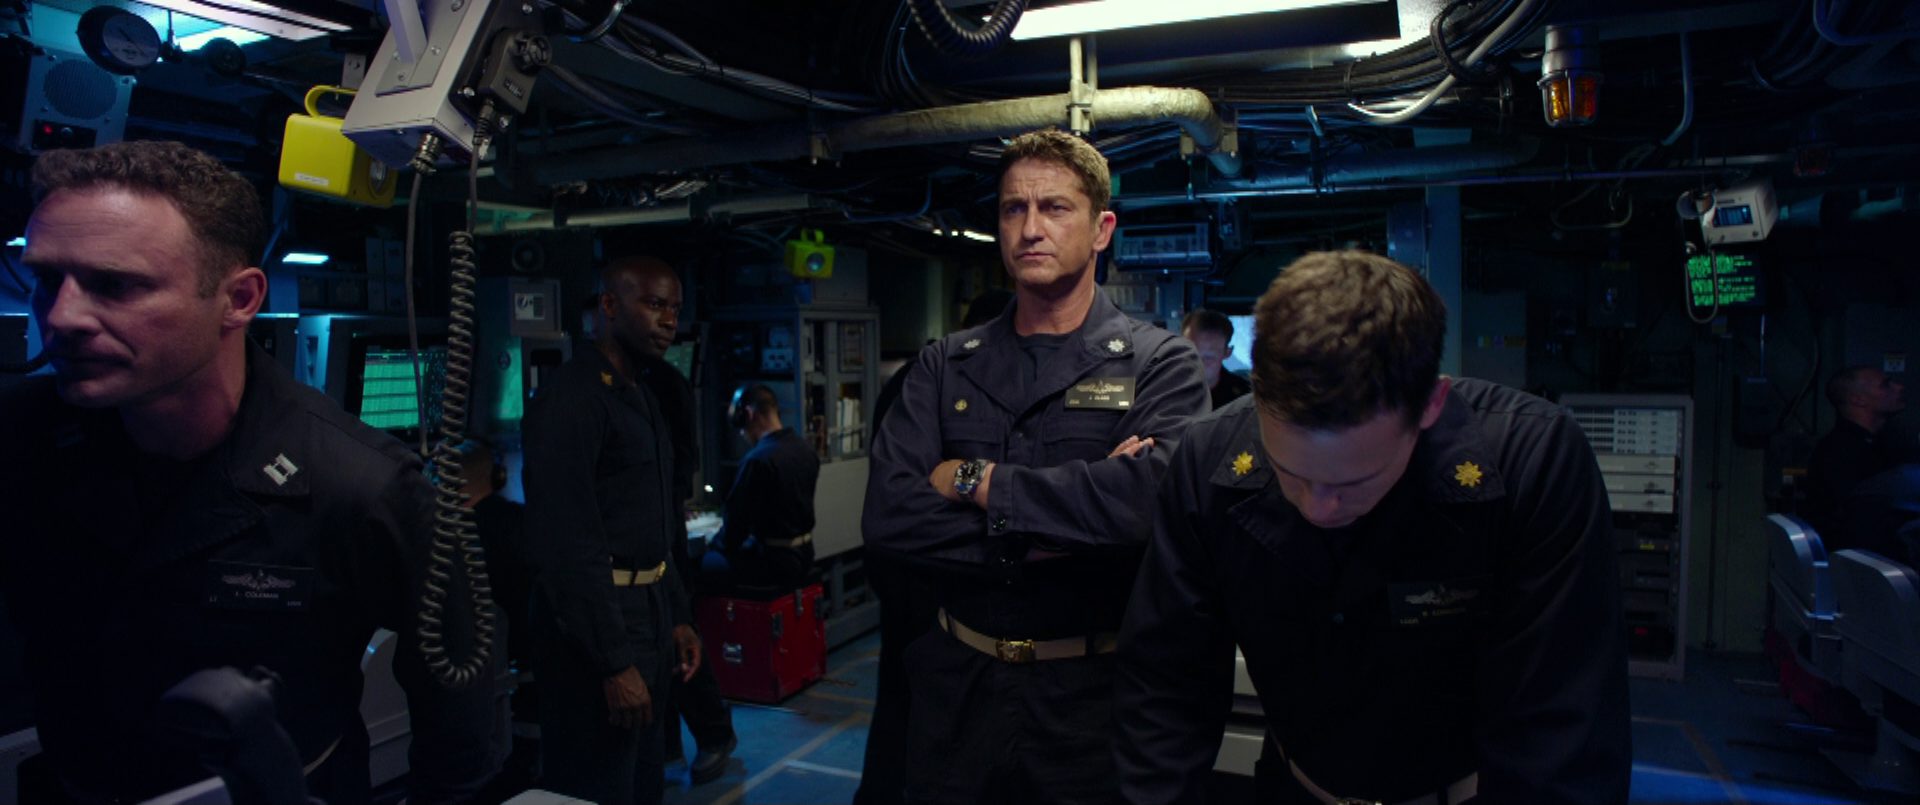 Gerard Butler as commander of a US Navy submarine with his arms crossed and his eyes focused and determined in the dimly lit control center in the presence of some of his sailors.